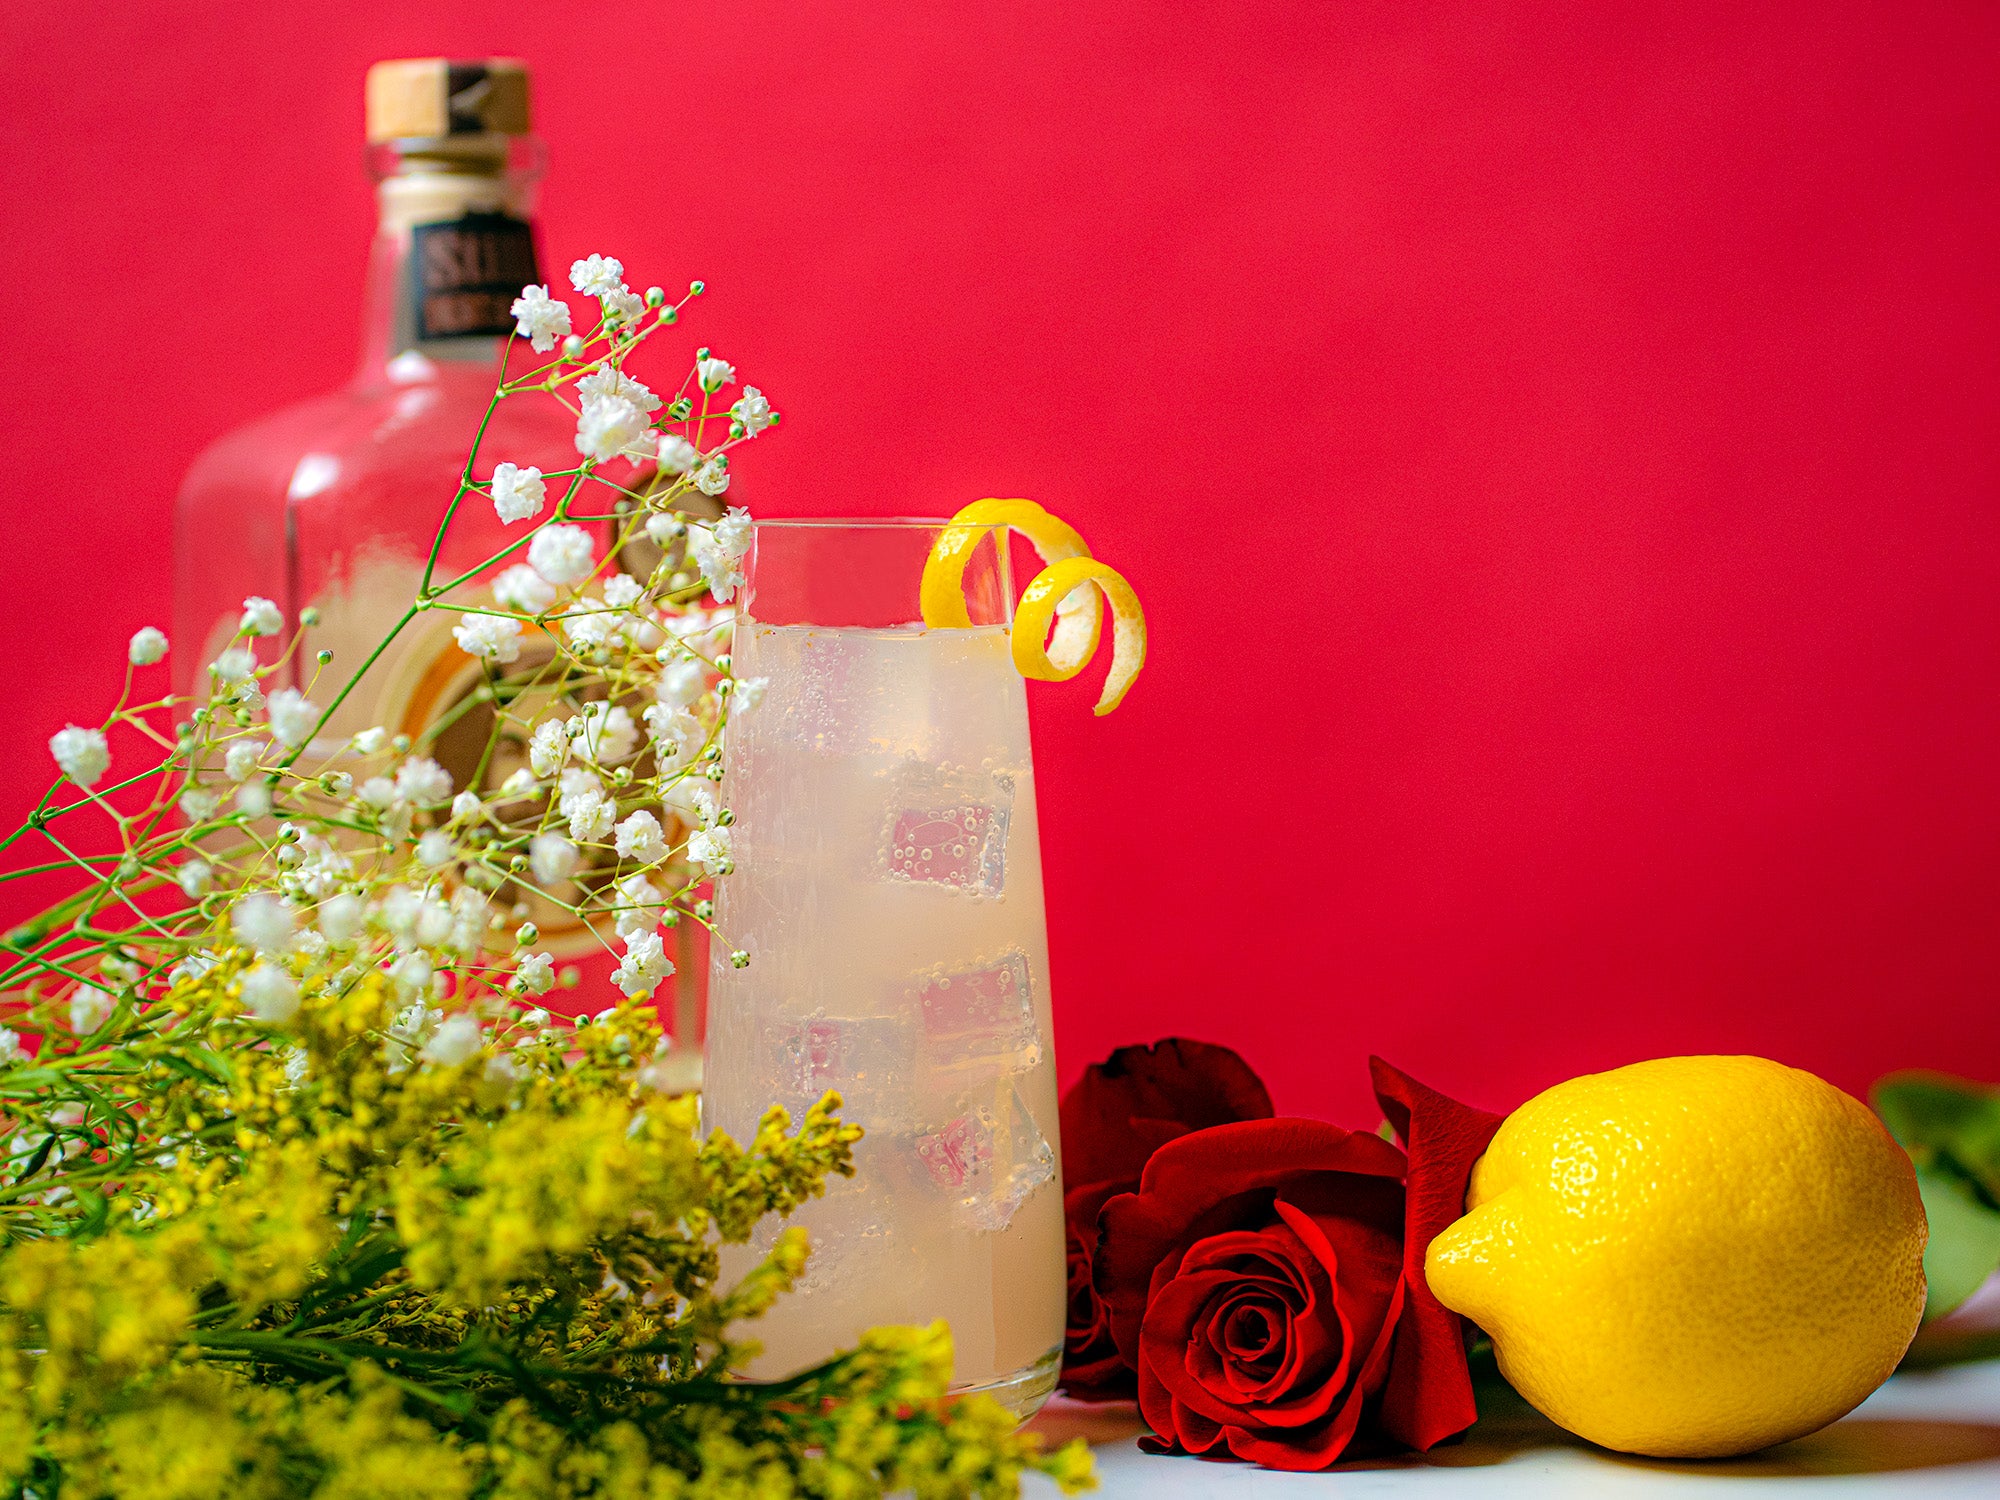 Indian Rose Gin Zinger with flowers and a bottle of Still 630 gin